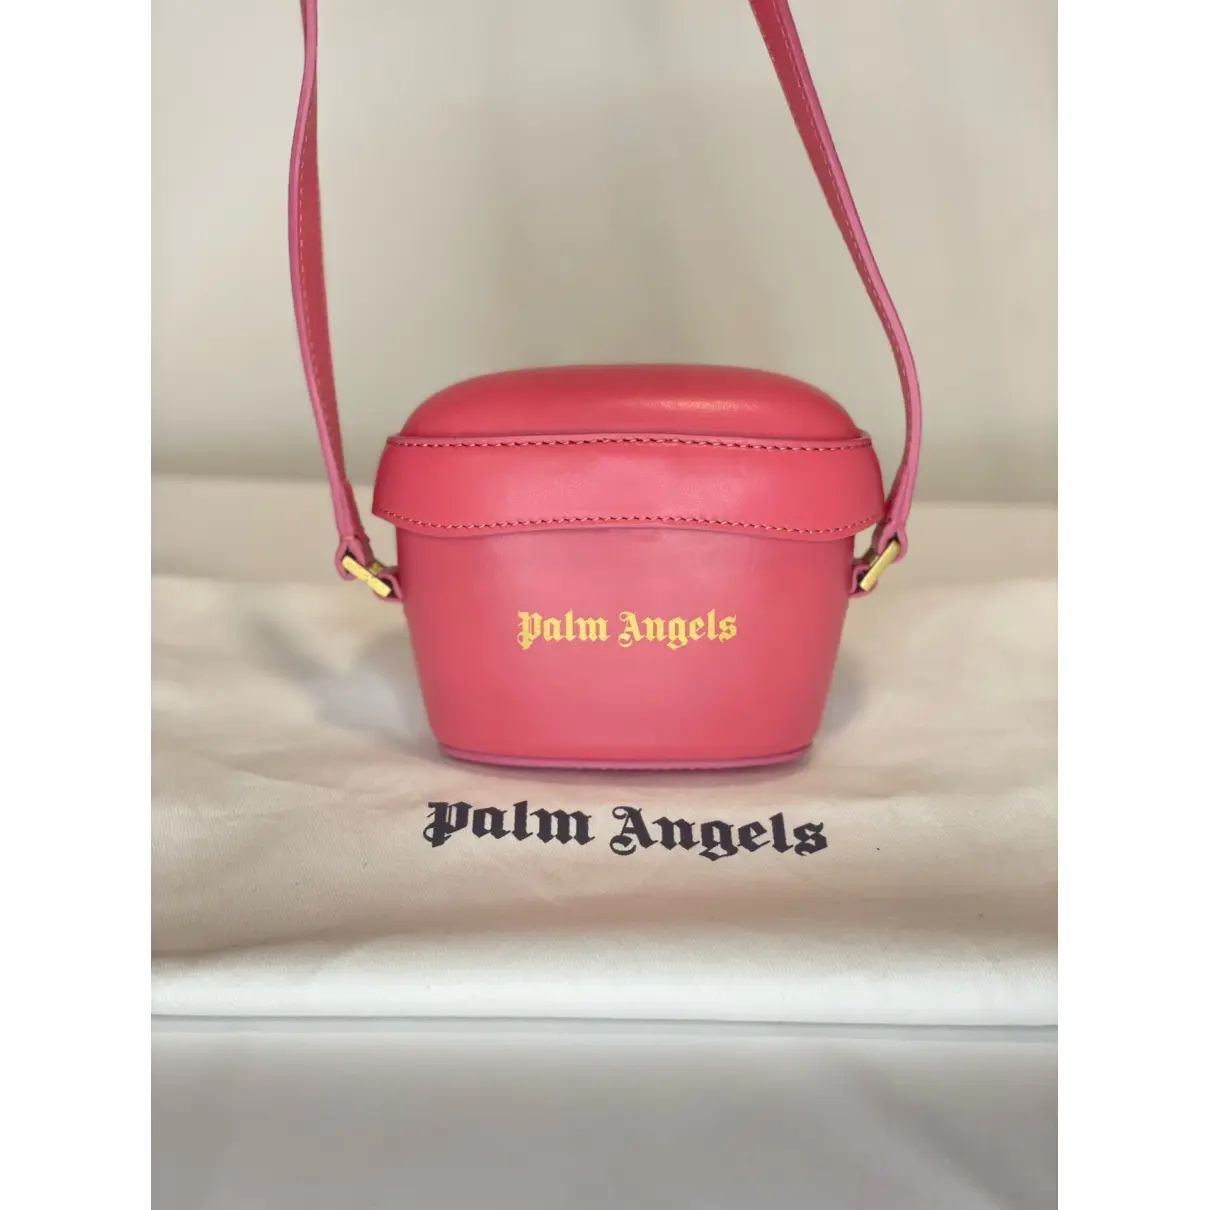 Buy Palm Angels Leather mini bag online